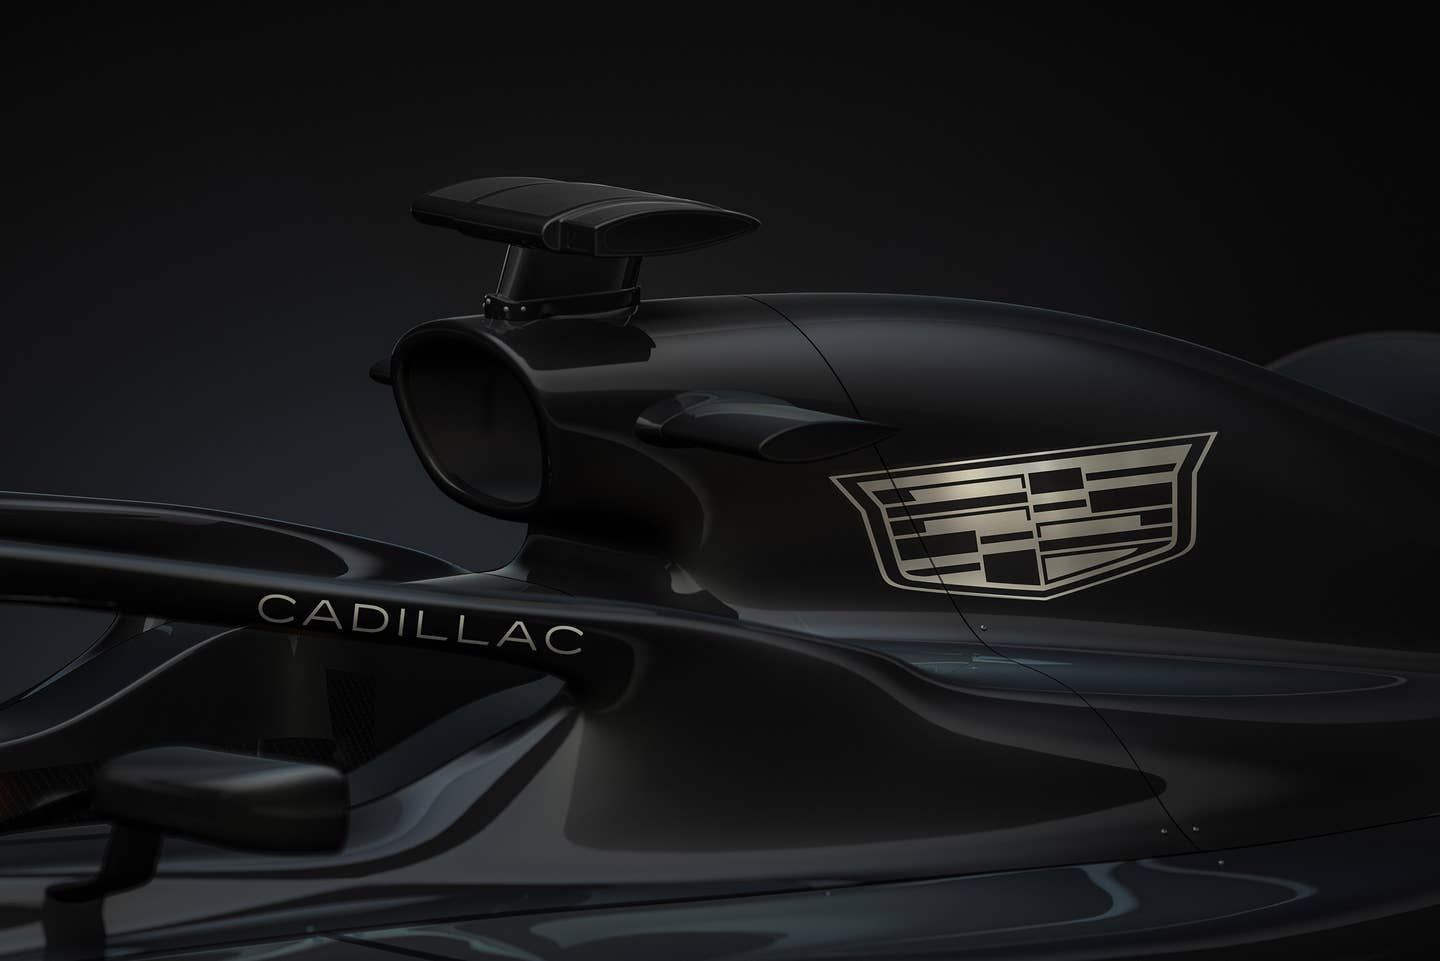 An image GM released alongside its announcement that it has formally registered as an F1 power unit supplier for the 2028 season.